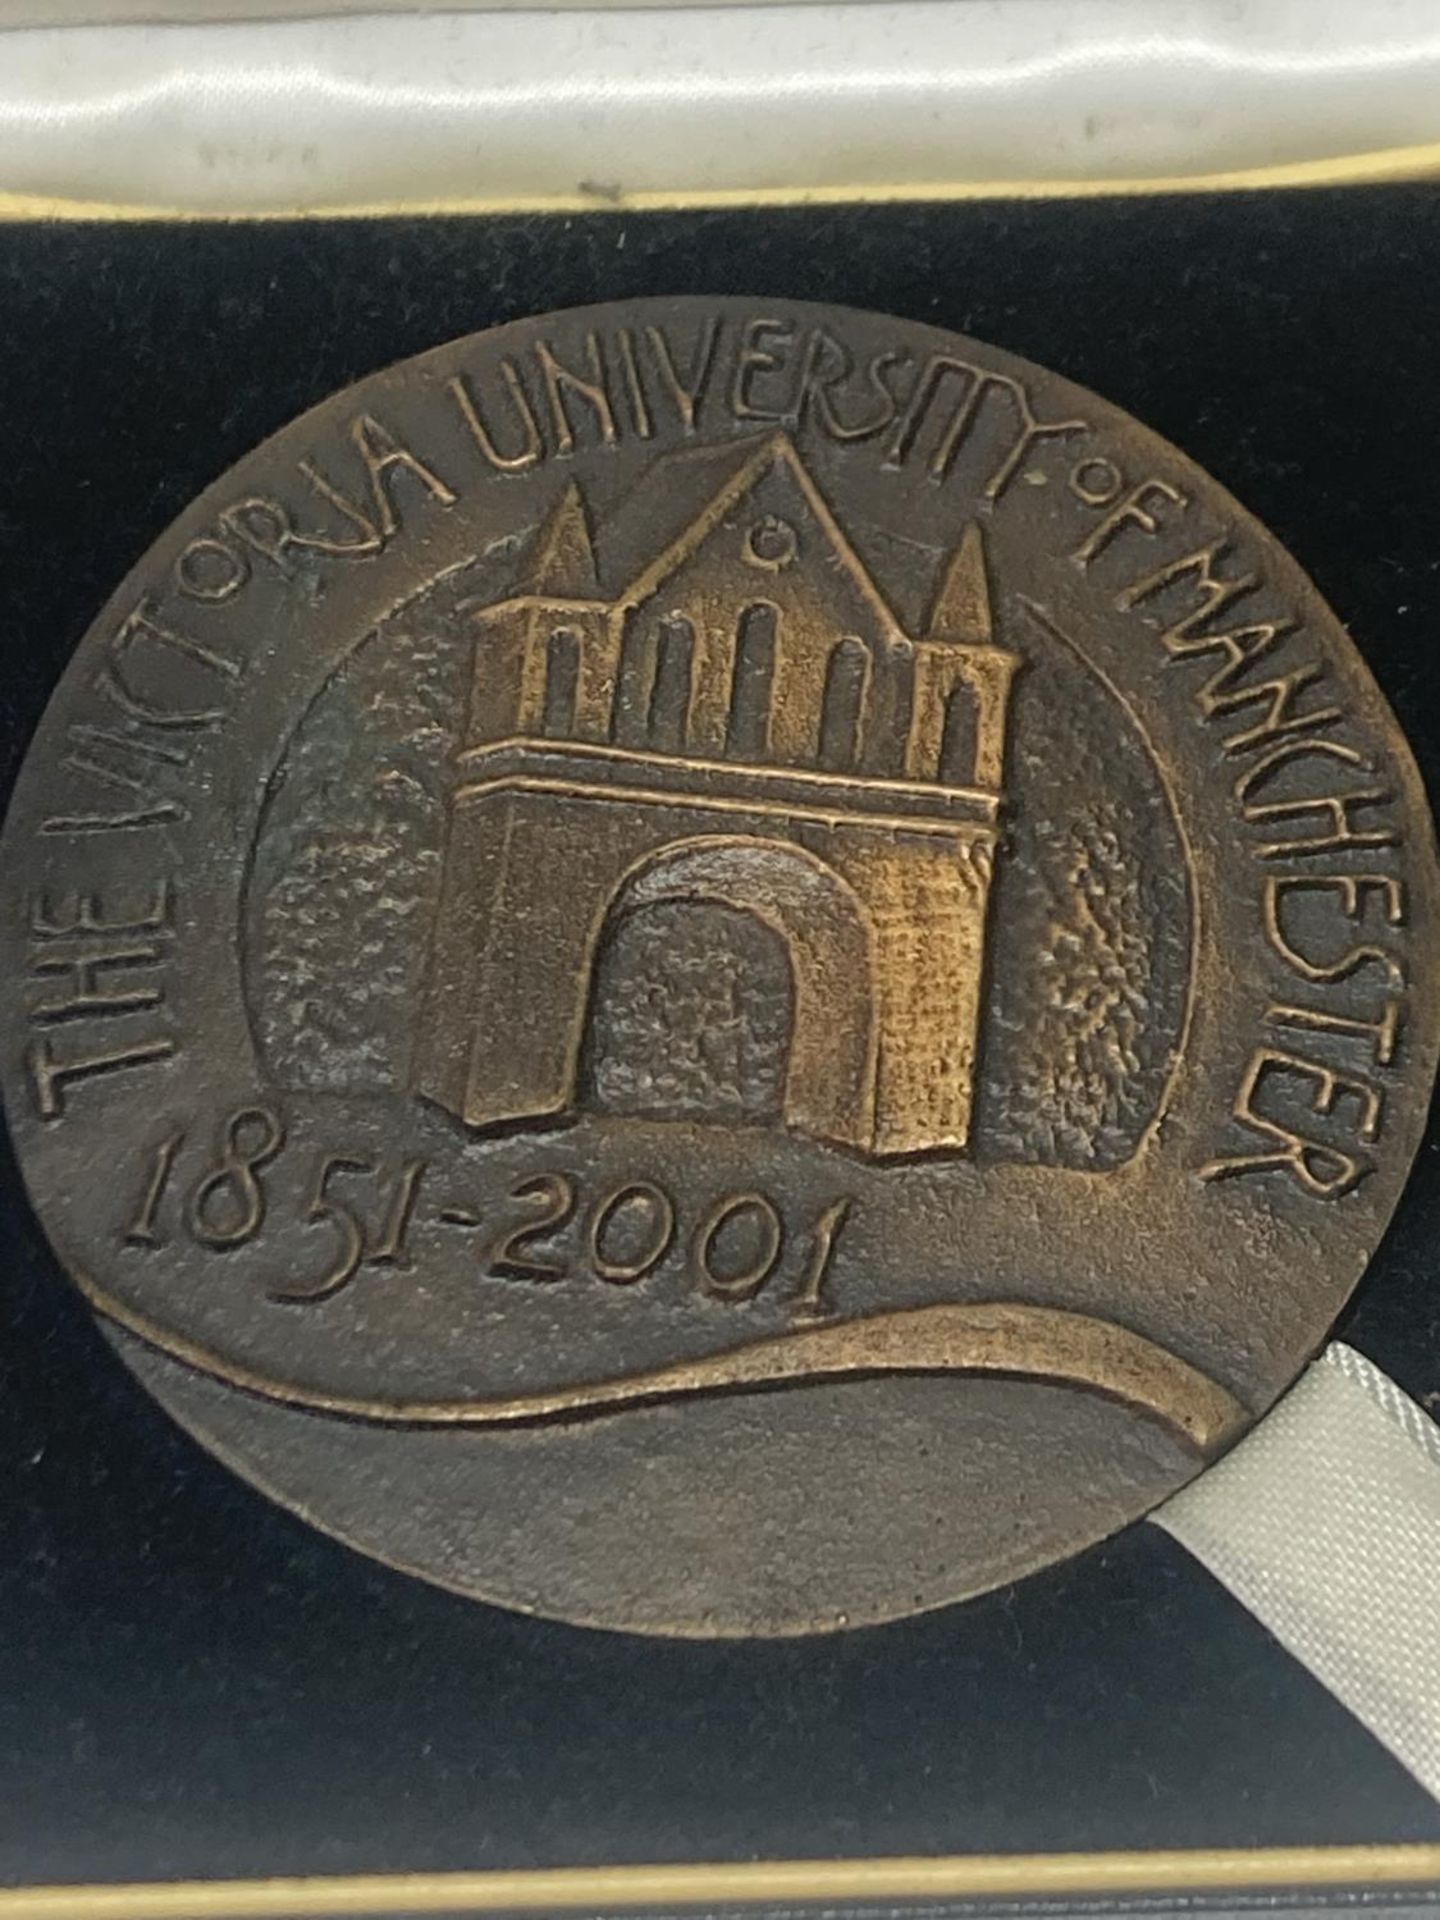 A LARGE BRONZE MEDAL VICTORIA UNIVERSITY OF MANCHESTER 1851 -2001 IN A PRESENTATION BOX - Image 3 of 6